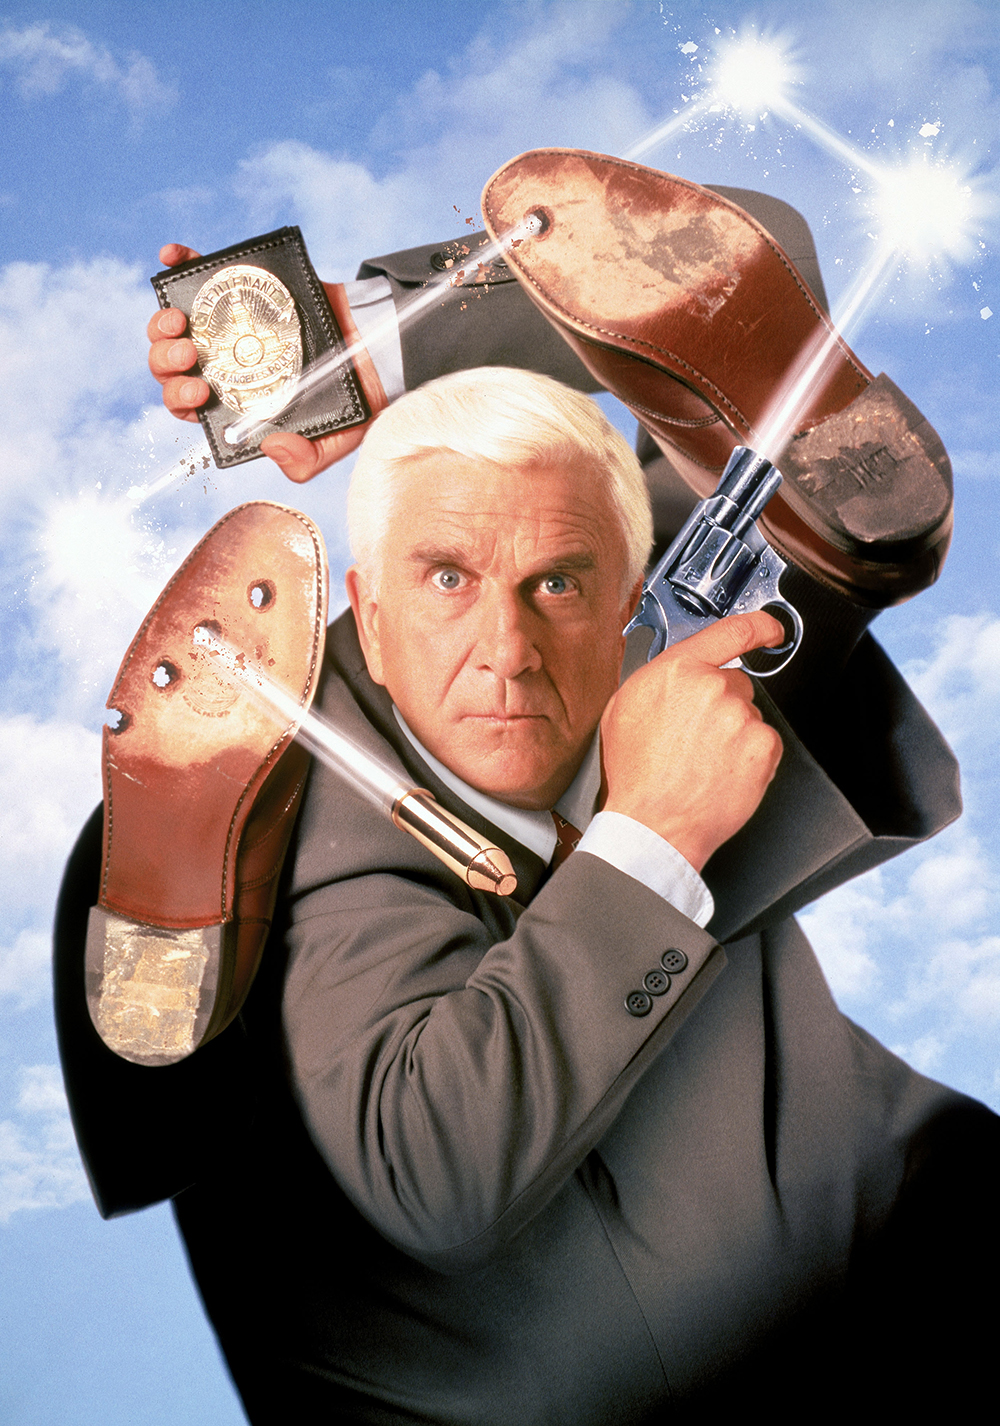 Naked Gun 33 1/3: The Final Insult Images. 